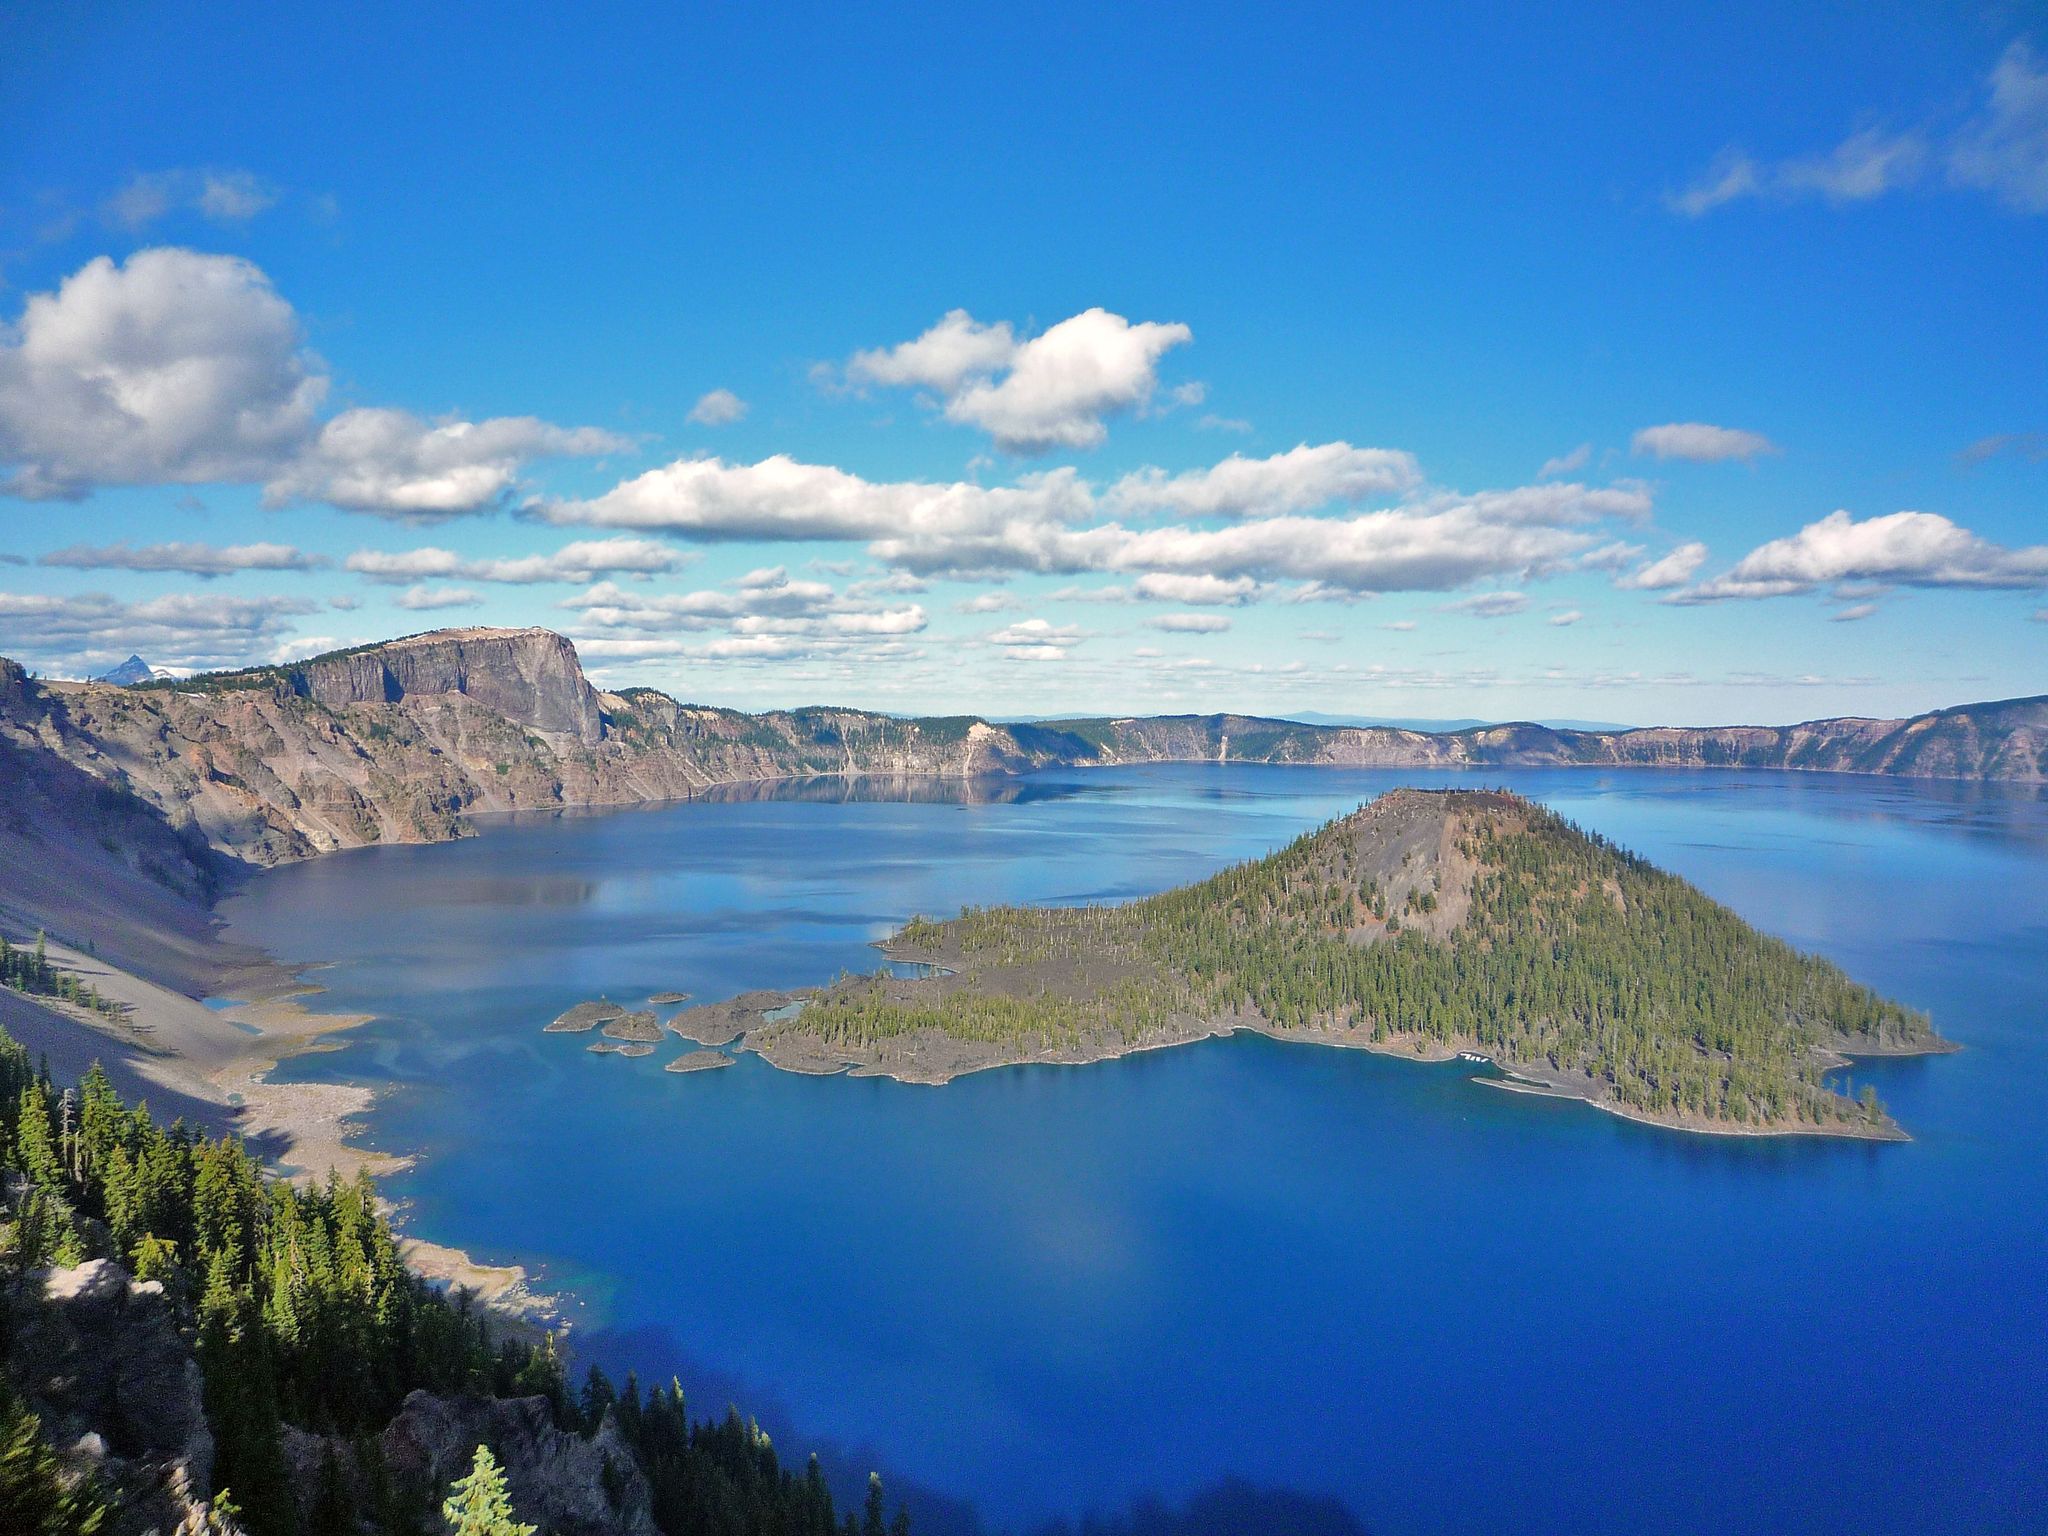 Looking at Crater Lake and Wizard Island from Discovery Point